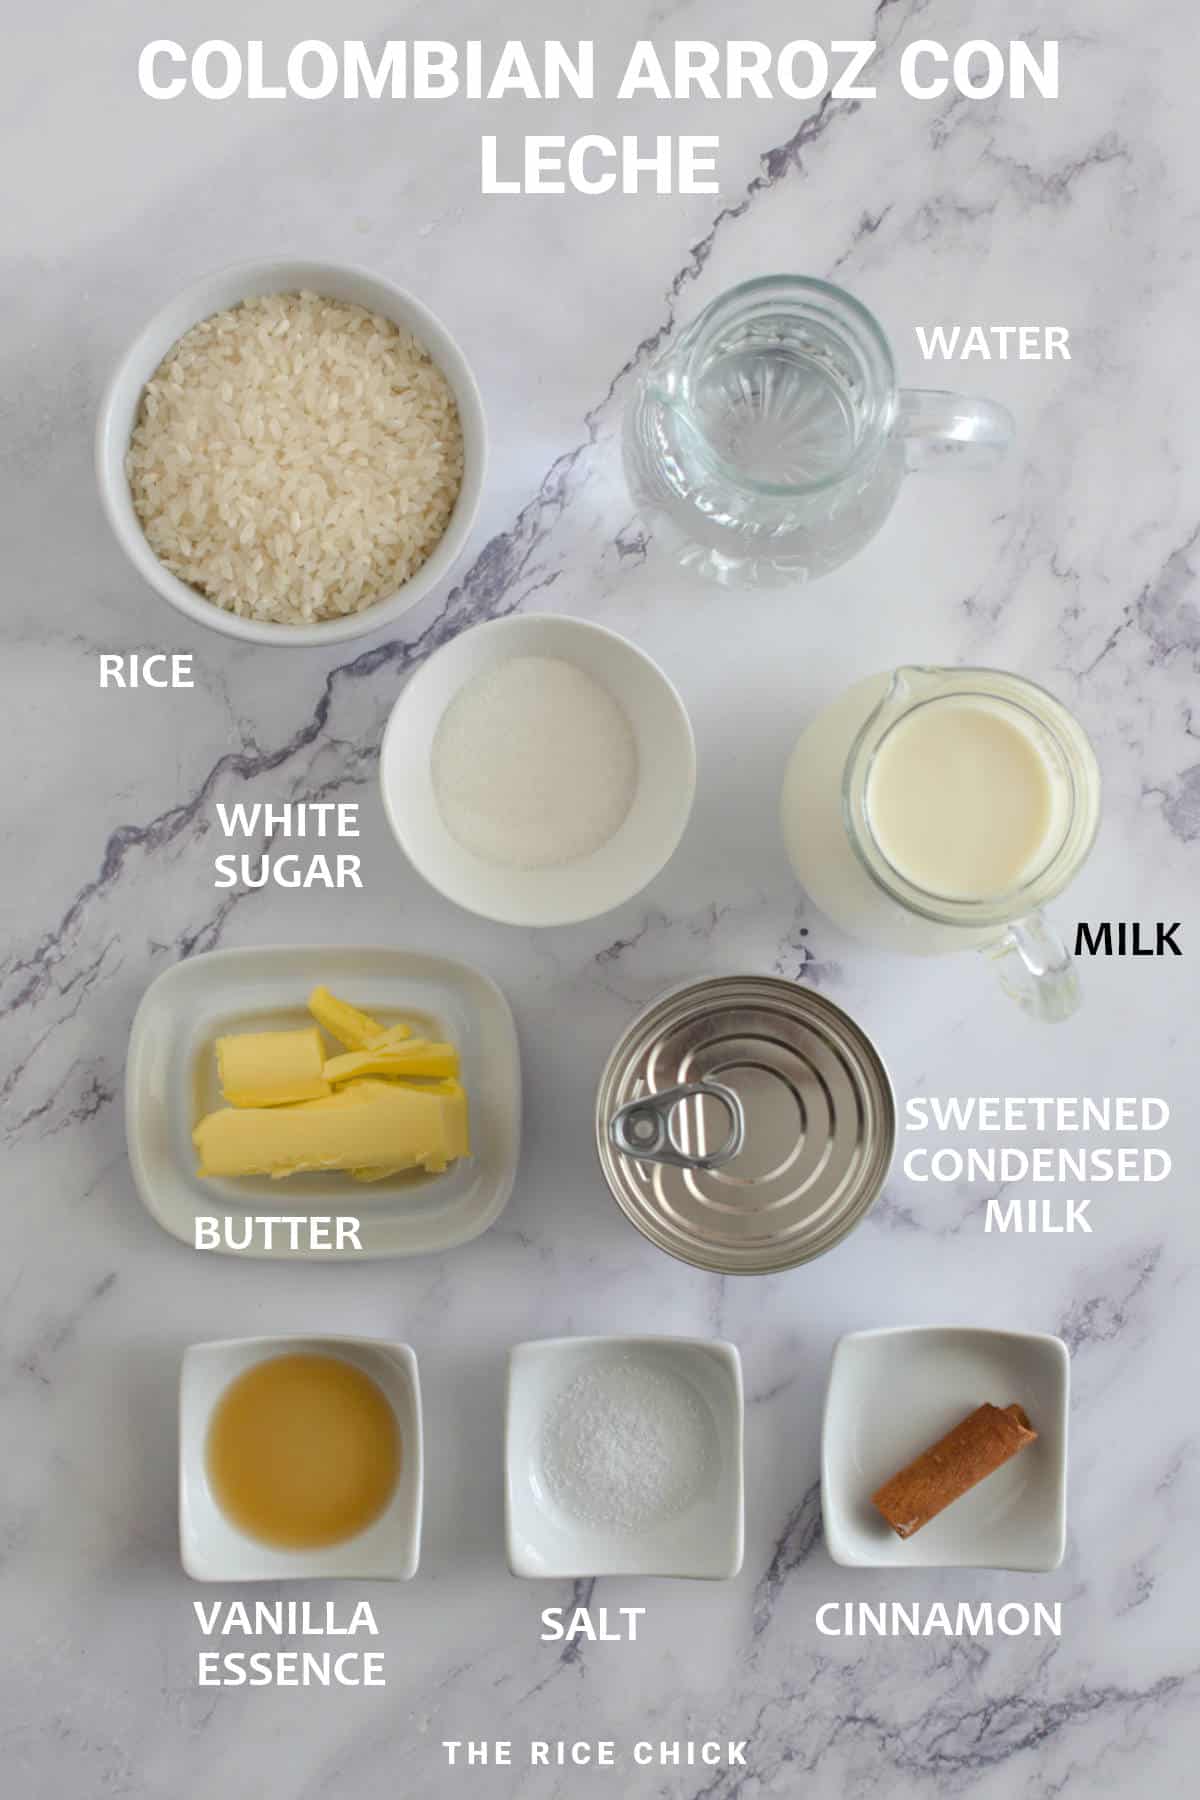 Ingredients for Colombian arroz con leche.